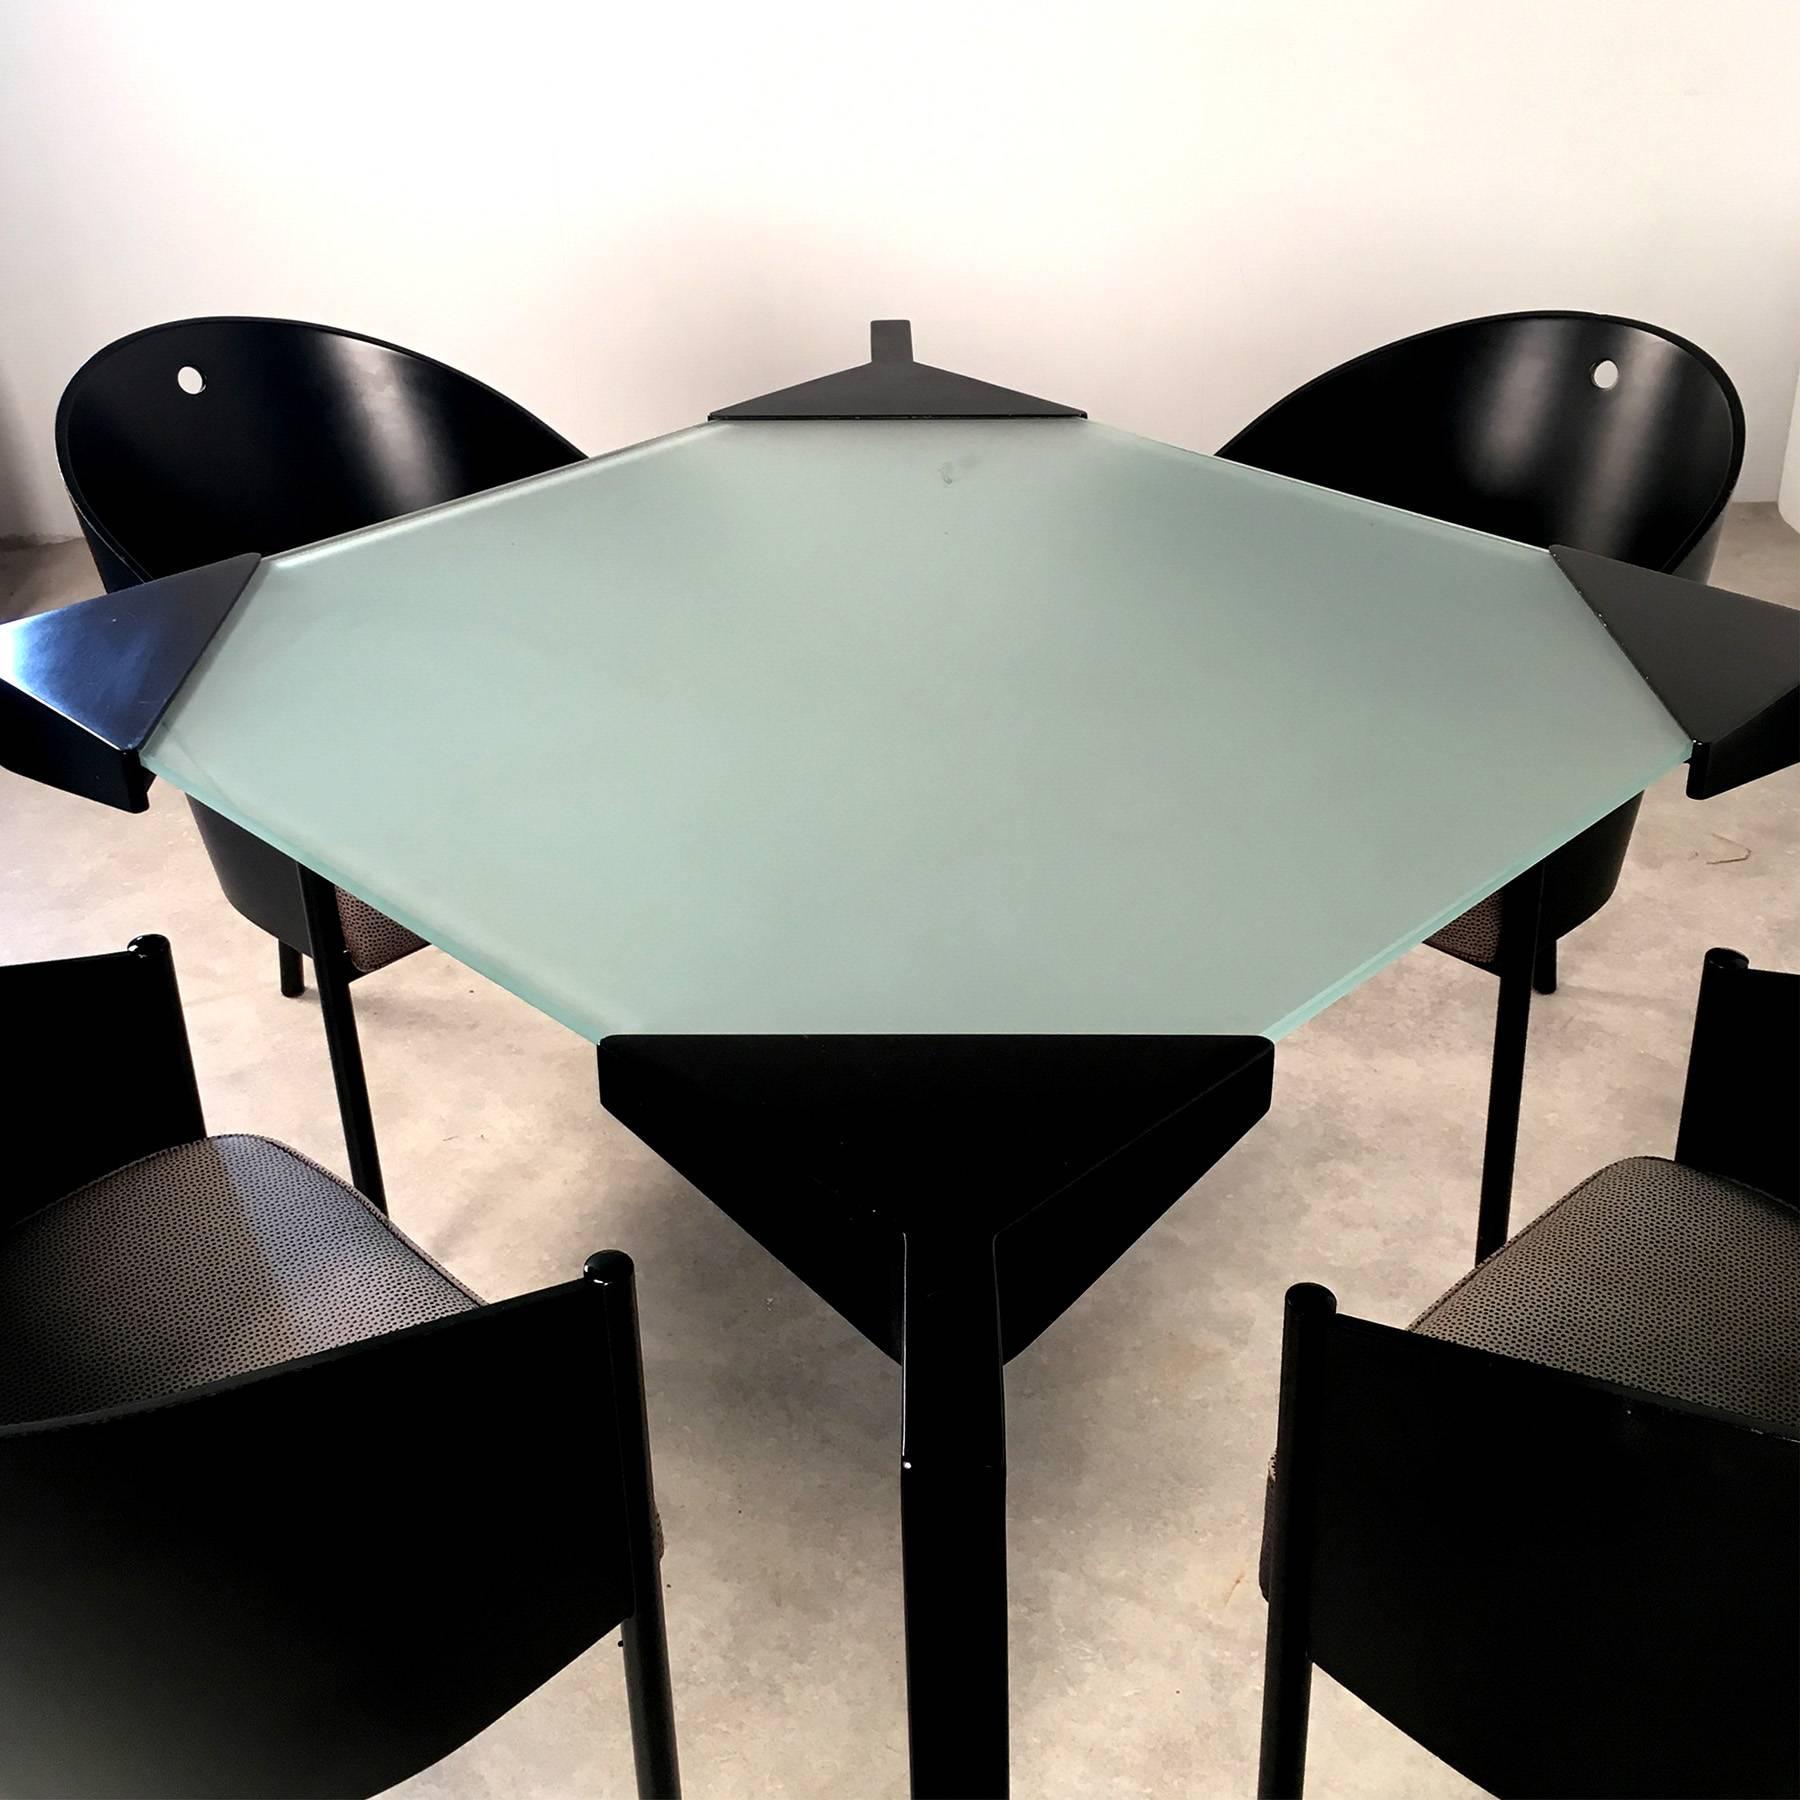 Steel Postmodern Dining Table from the 1980s For Sale